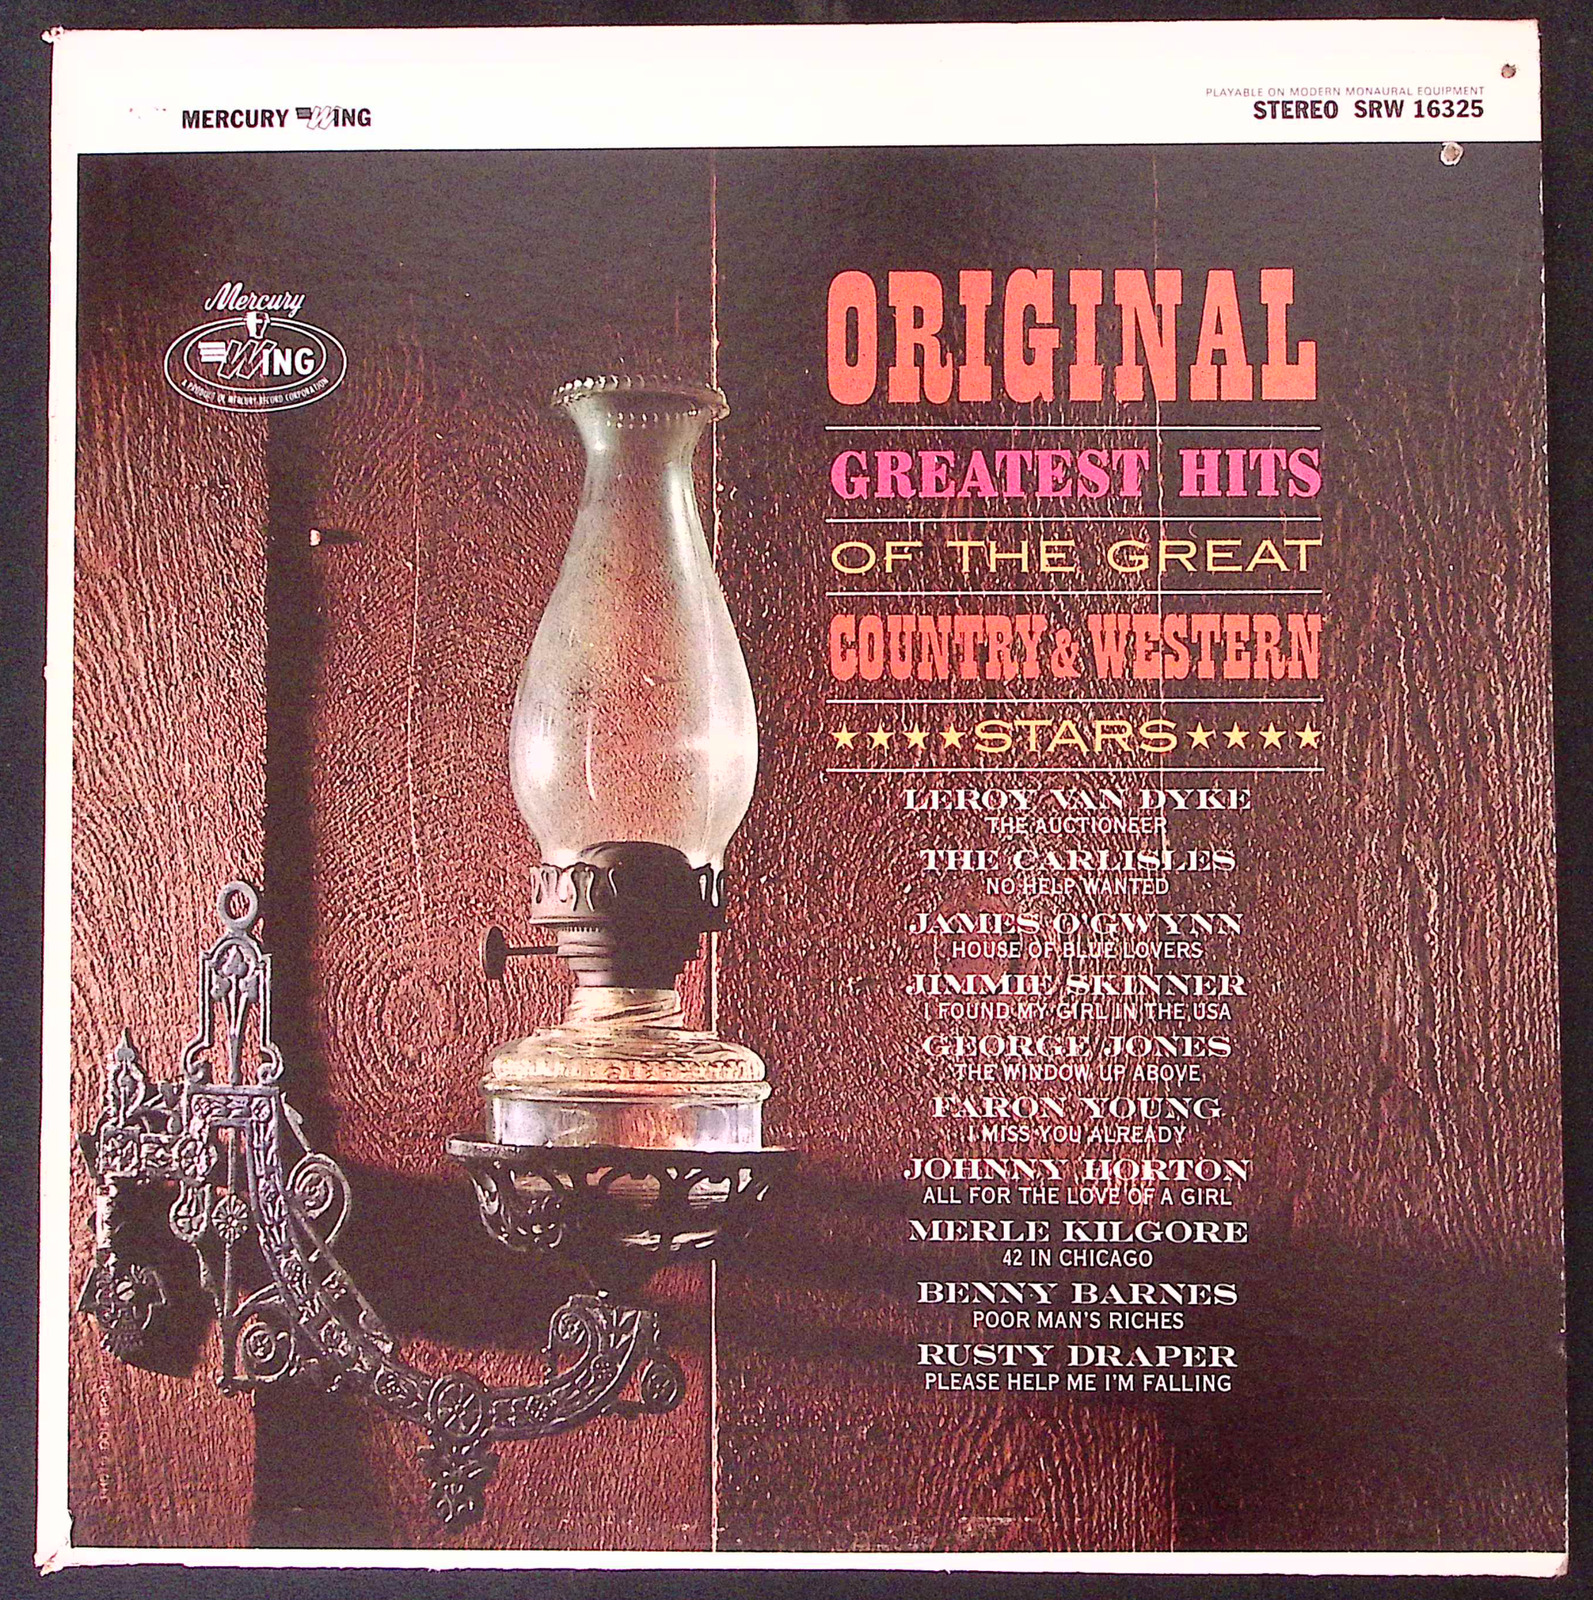 ORIGINAL GREATEST HITS OF THE GREAT COUNTRY & WESTERN STARS VINYL LP 129-11W